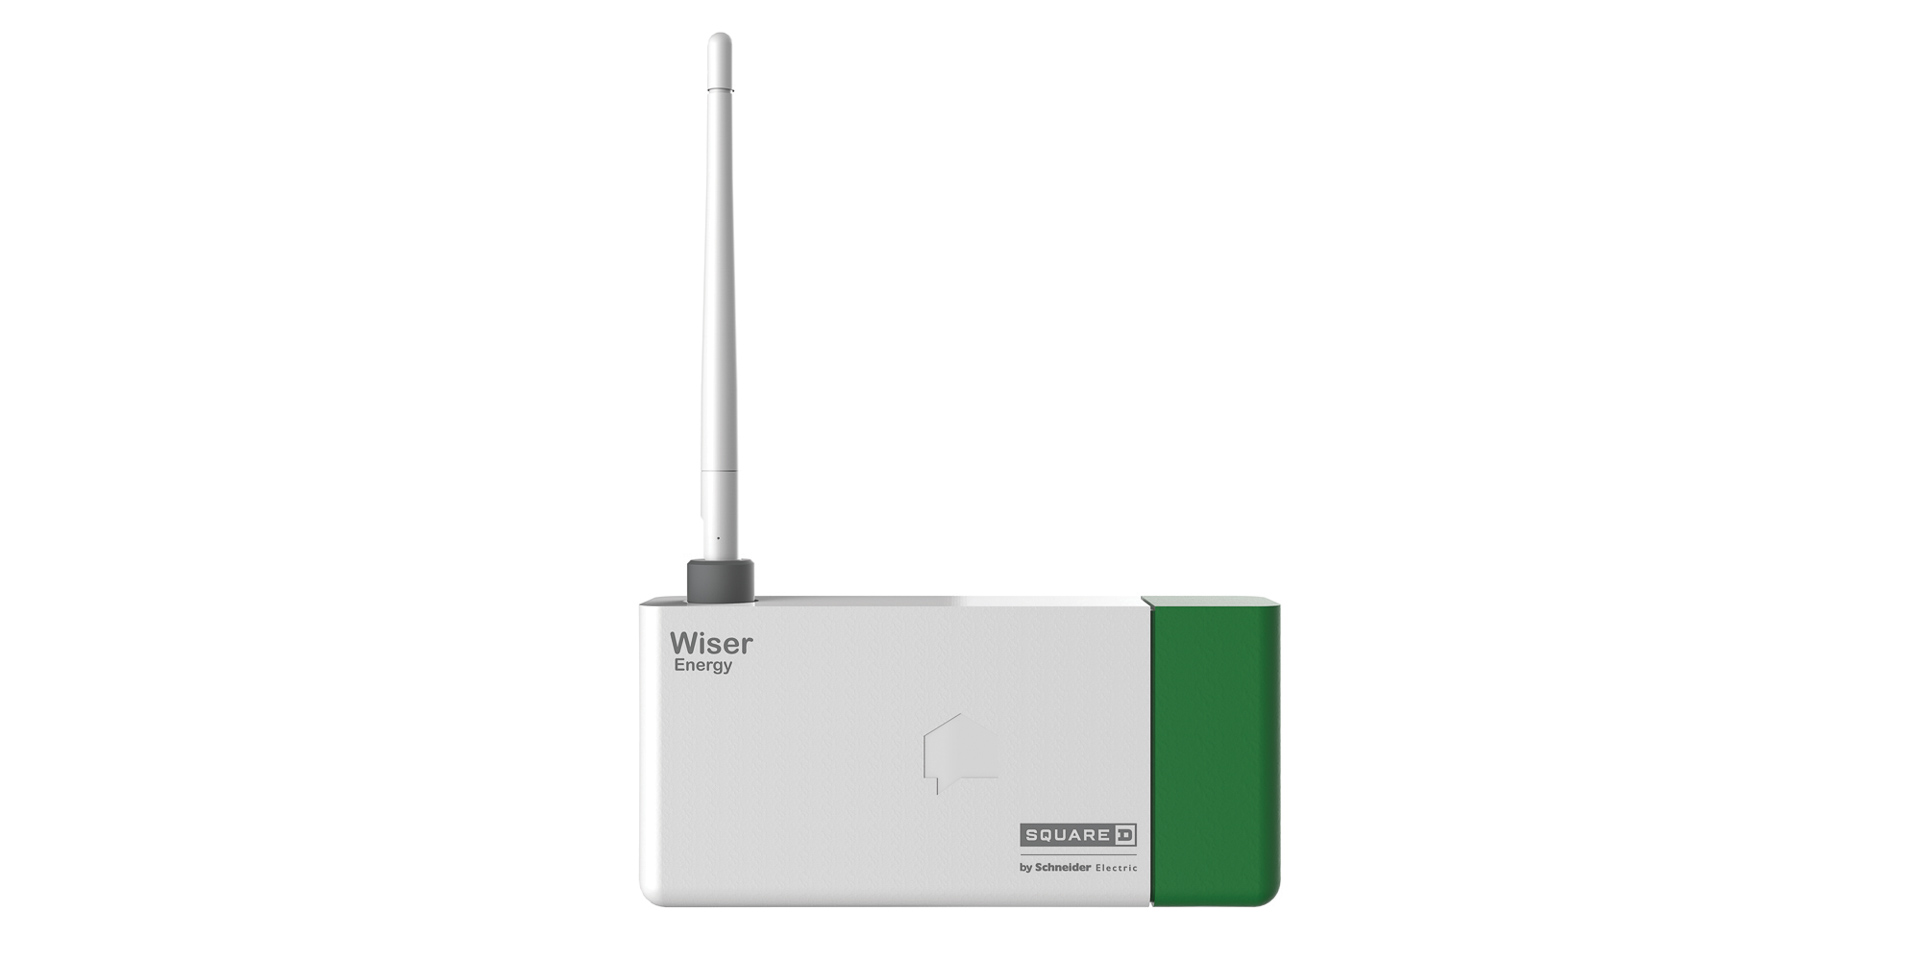 The Wiser Energy whole-home energy monitor incorporates technology from Sense. Image: Schneider Electric.